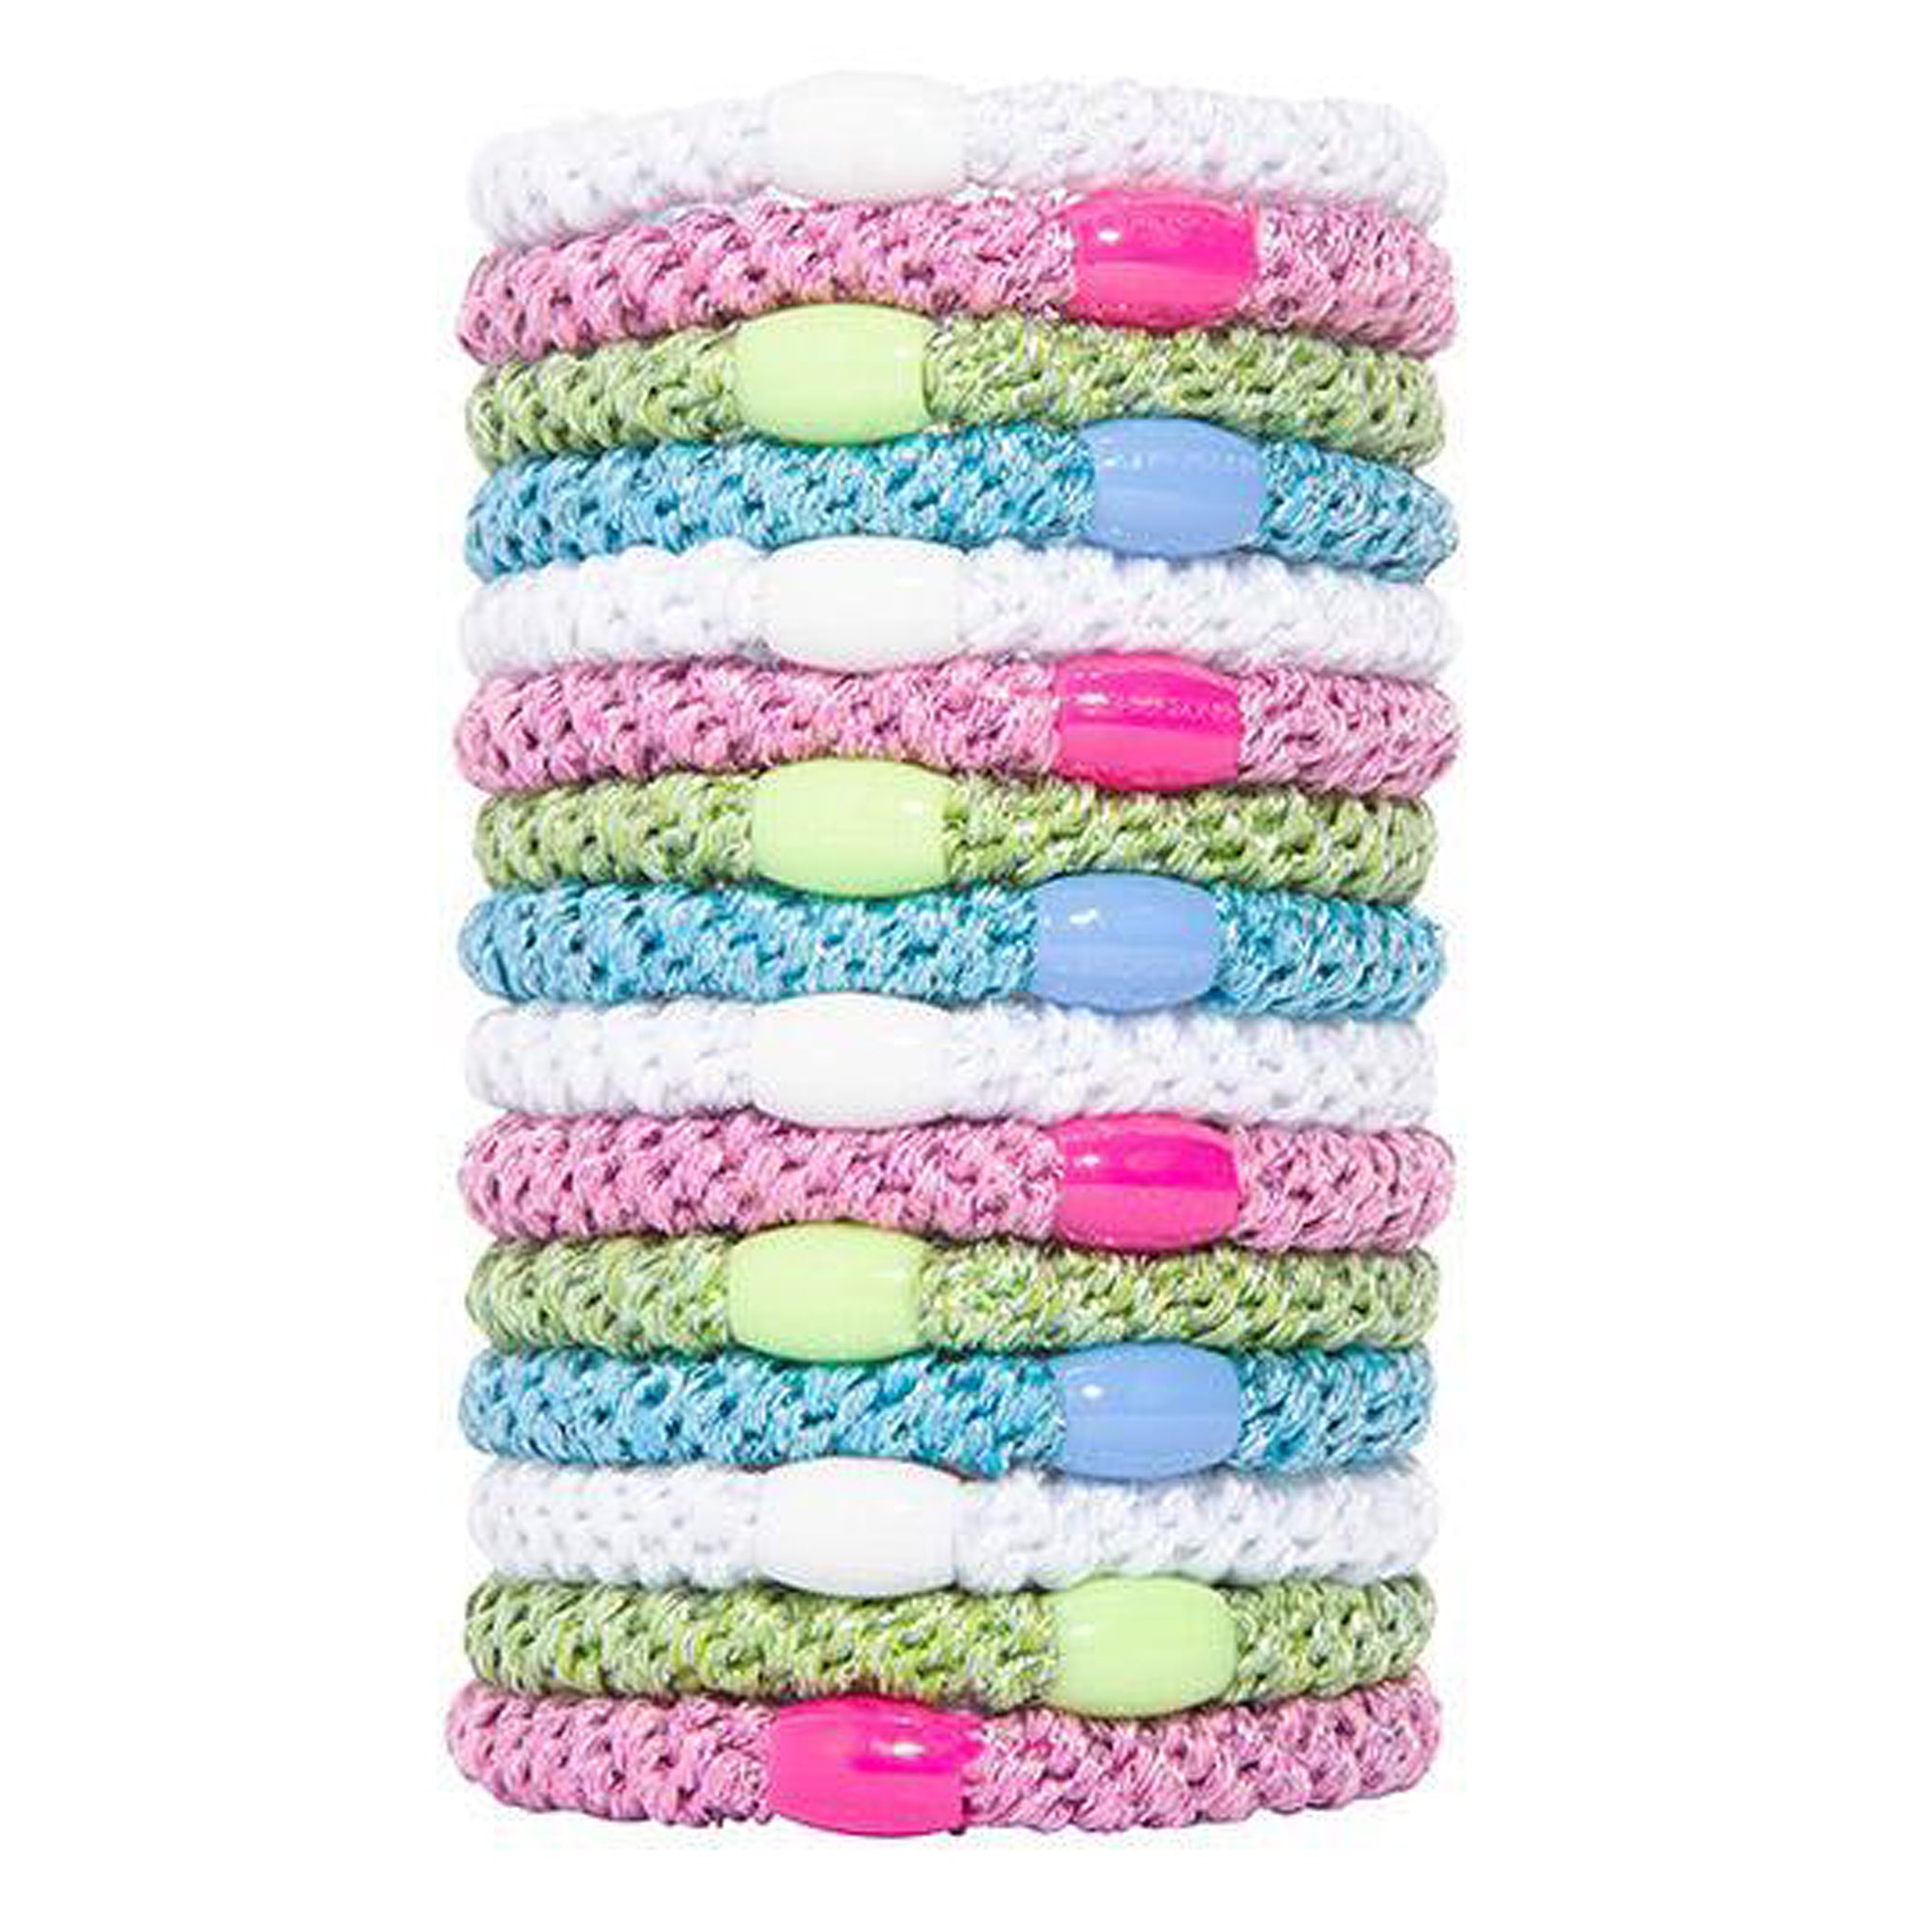 L. Erickson Grab and Go Pony Tube Hair Ties in Dazzle 15 Pack